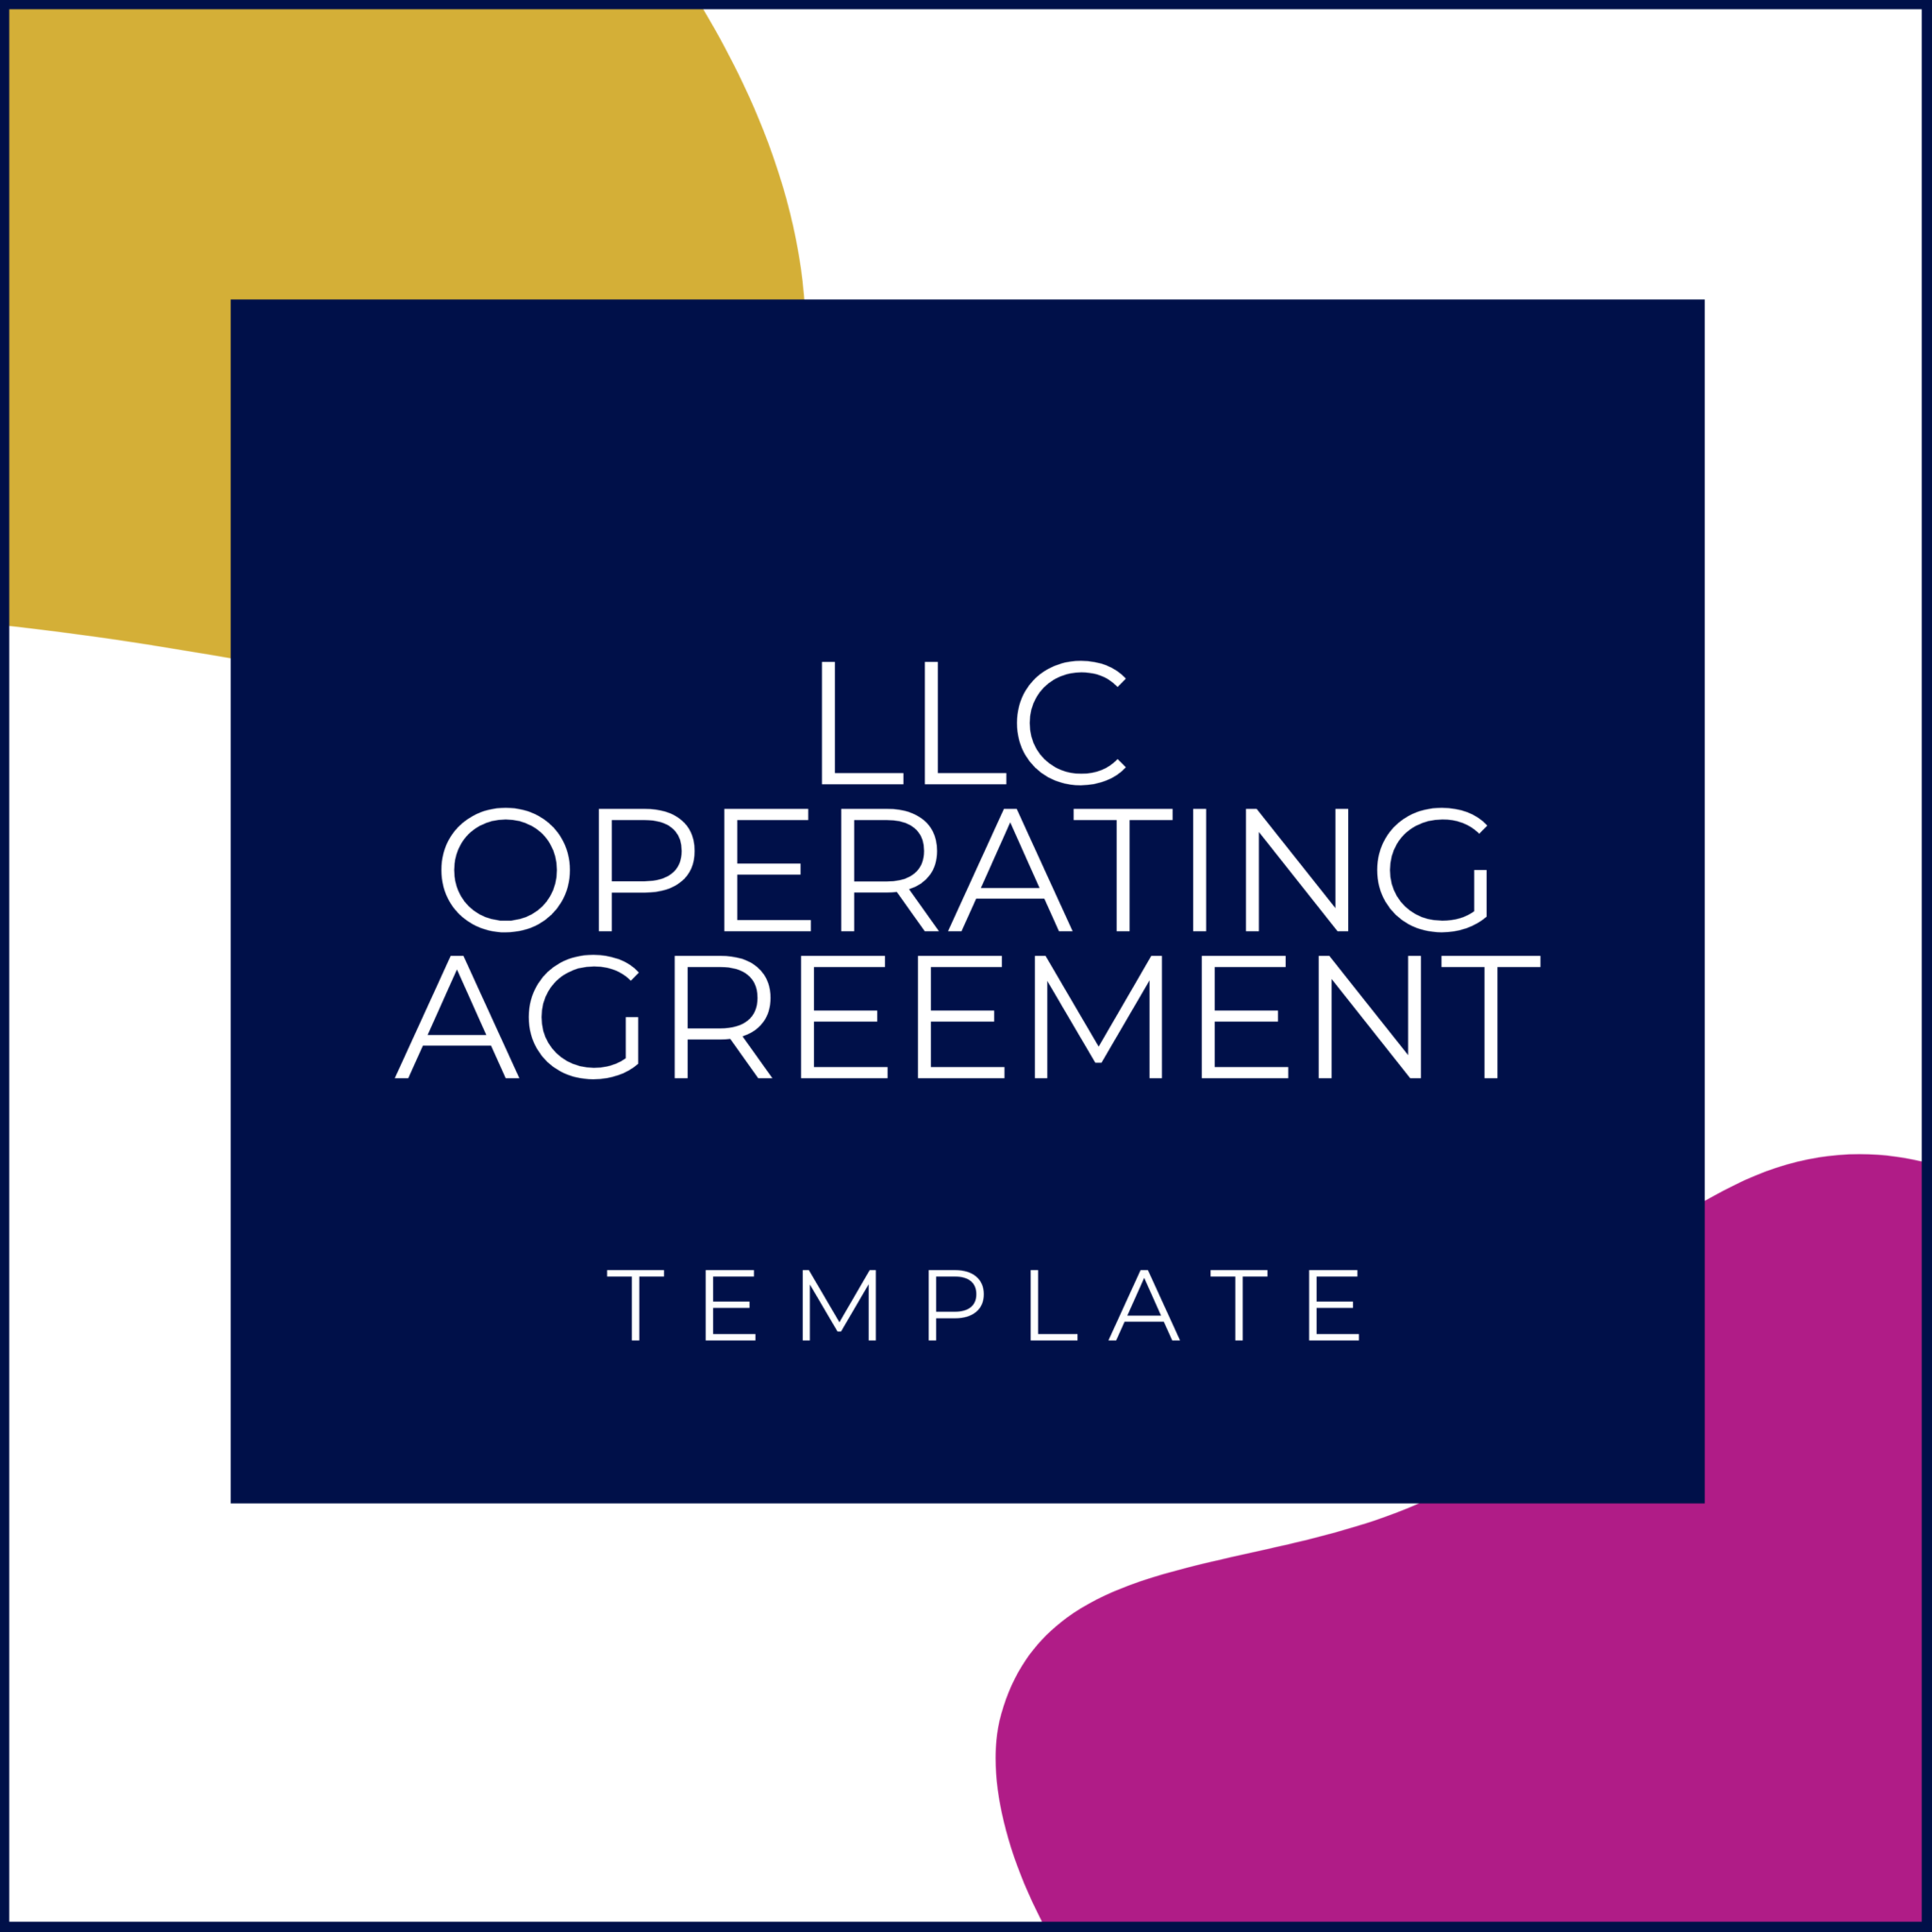 pllc-operating-agreement-template-tutore-org-master-of-documents